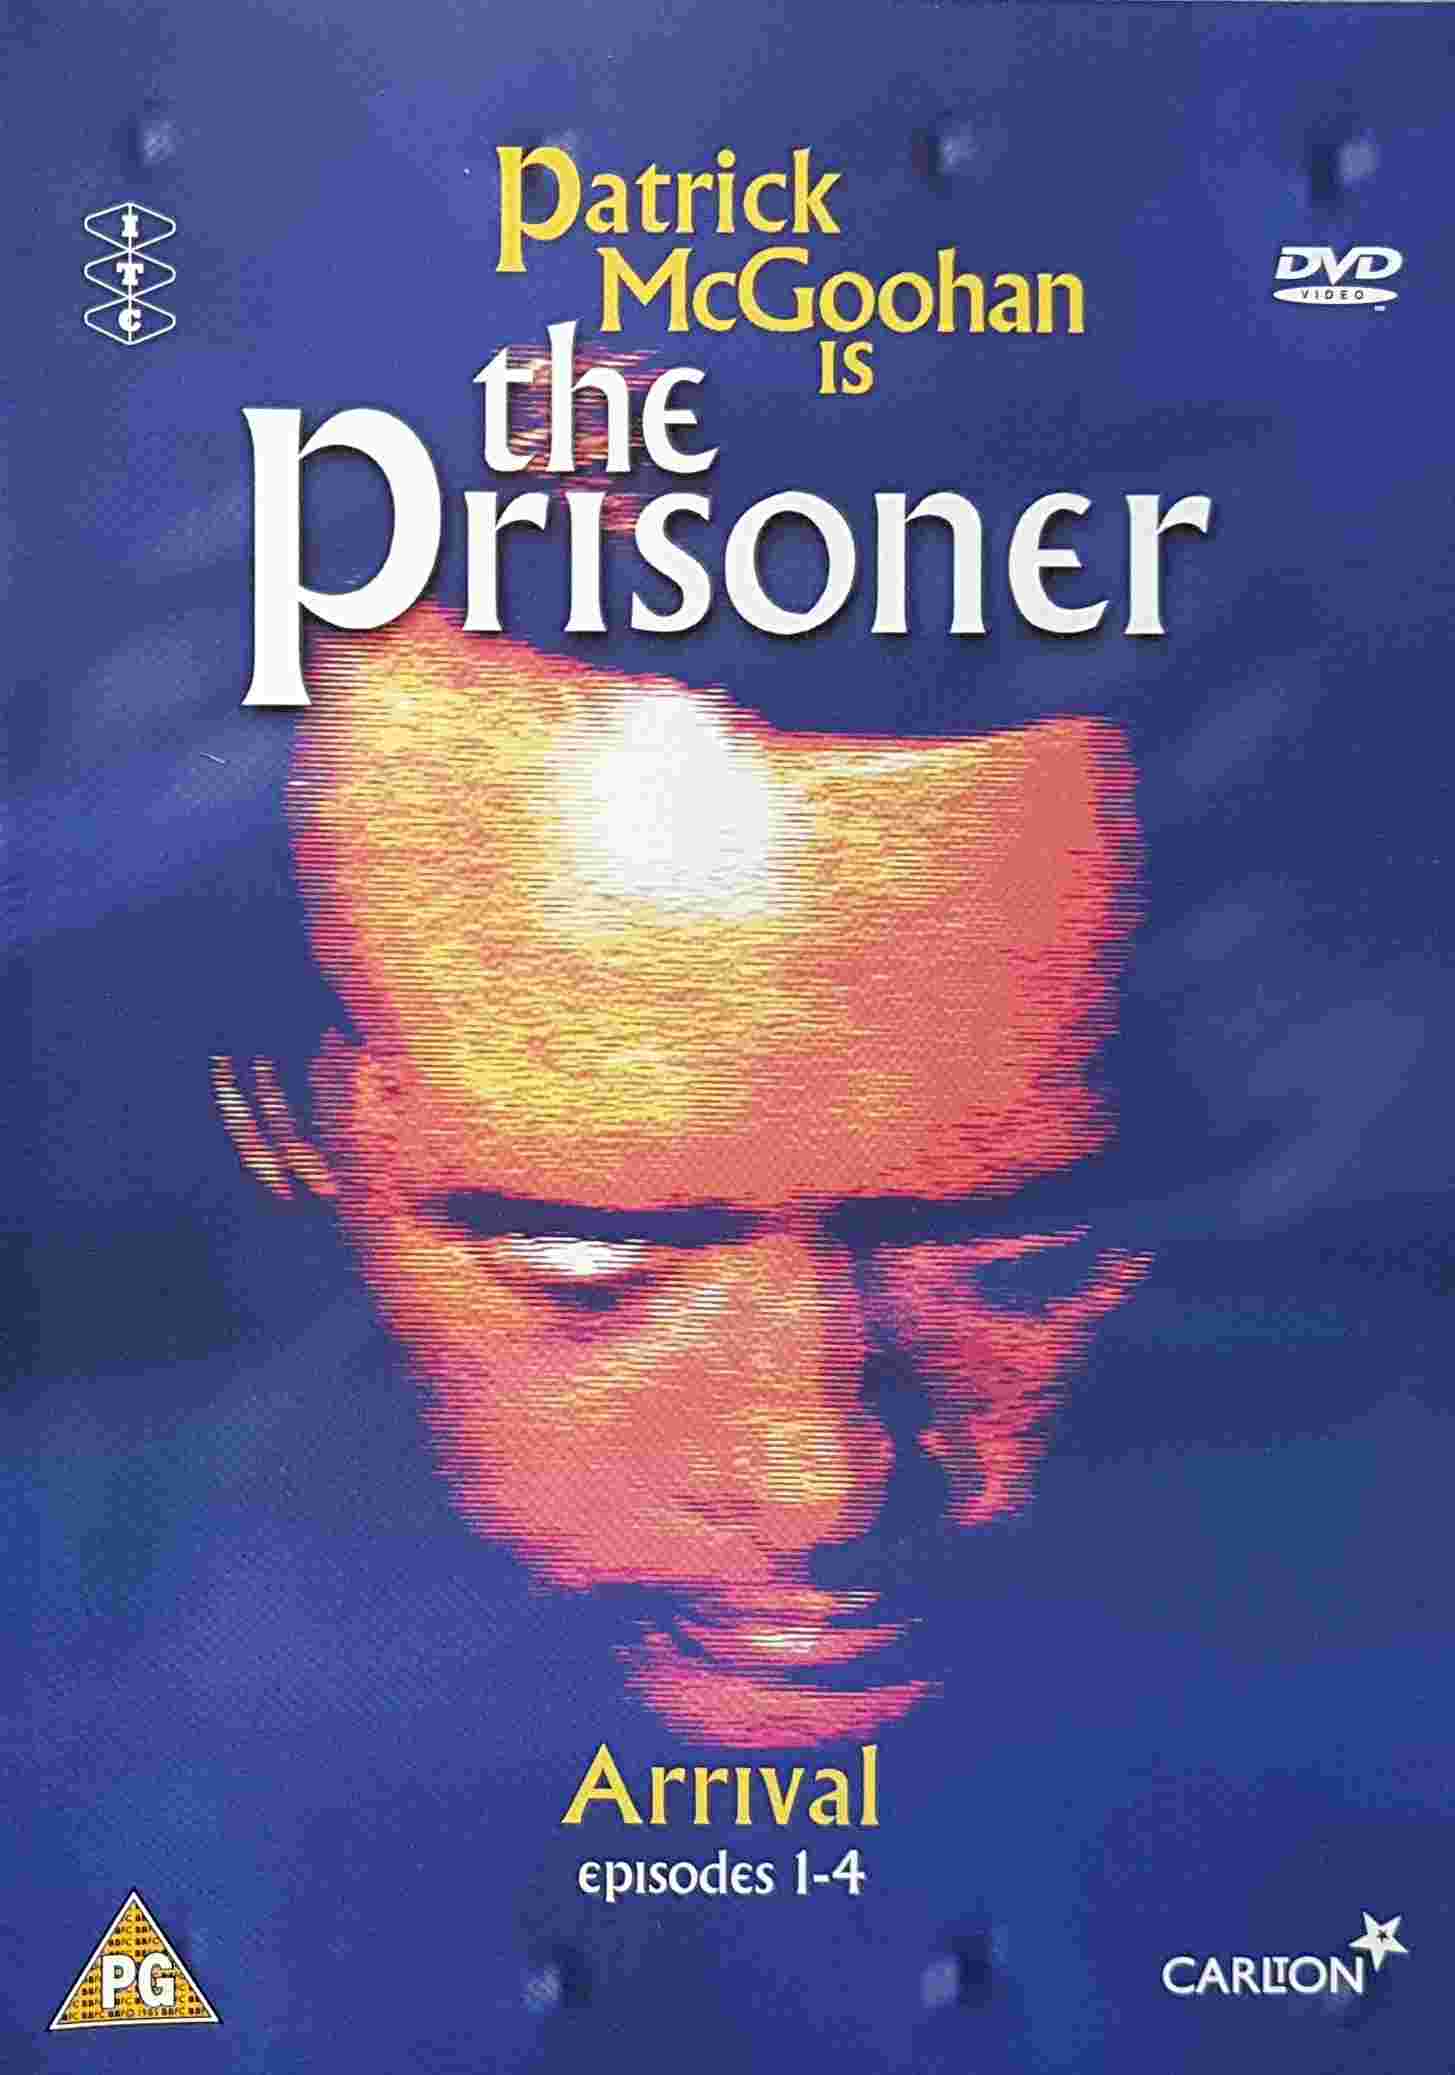 Picture of 37115 00943 The prisoner - Episodes 1 - 4 by artist Various from ITV, Channel 4 and Channel 5 dvds library